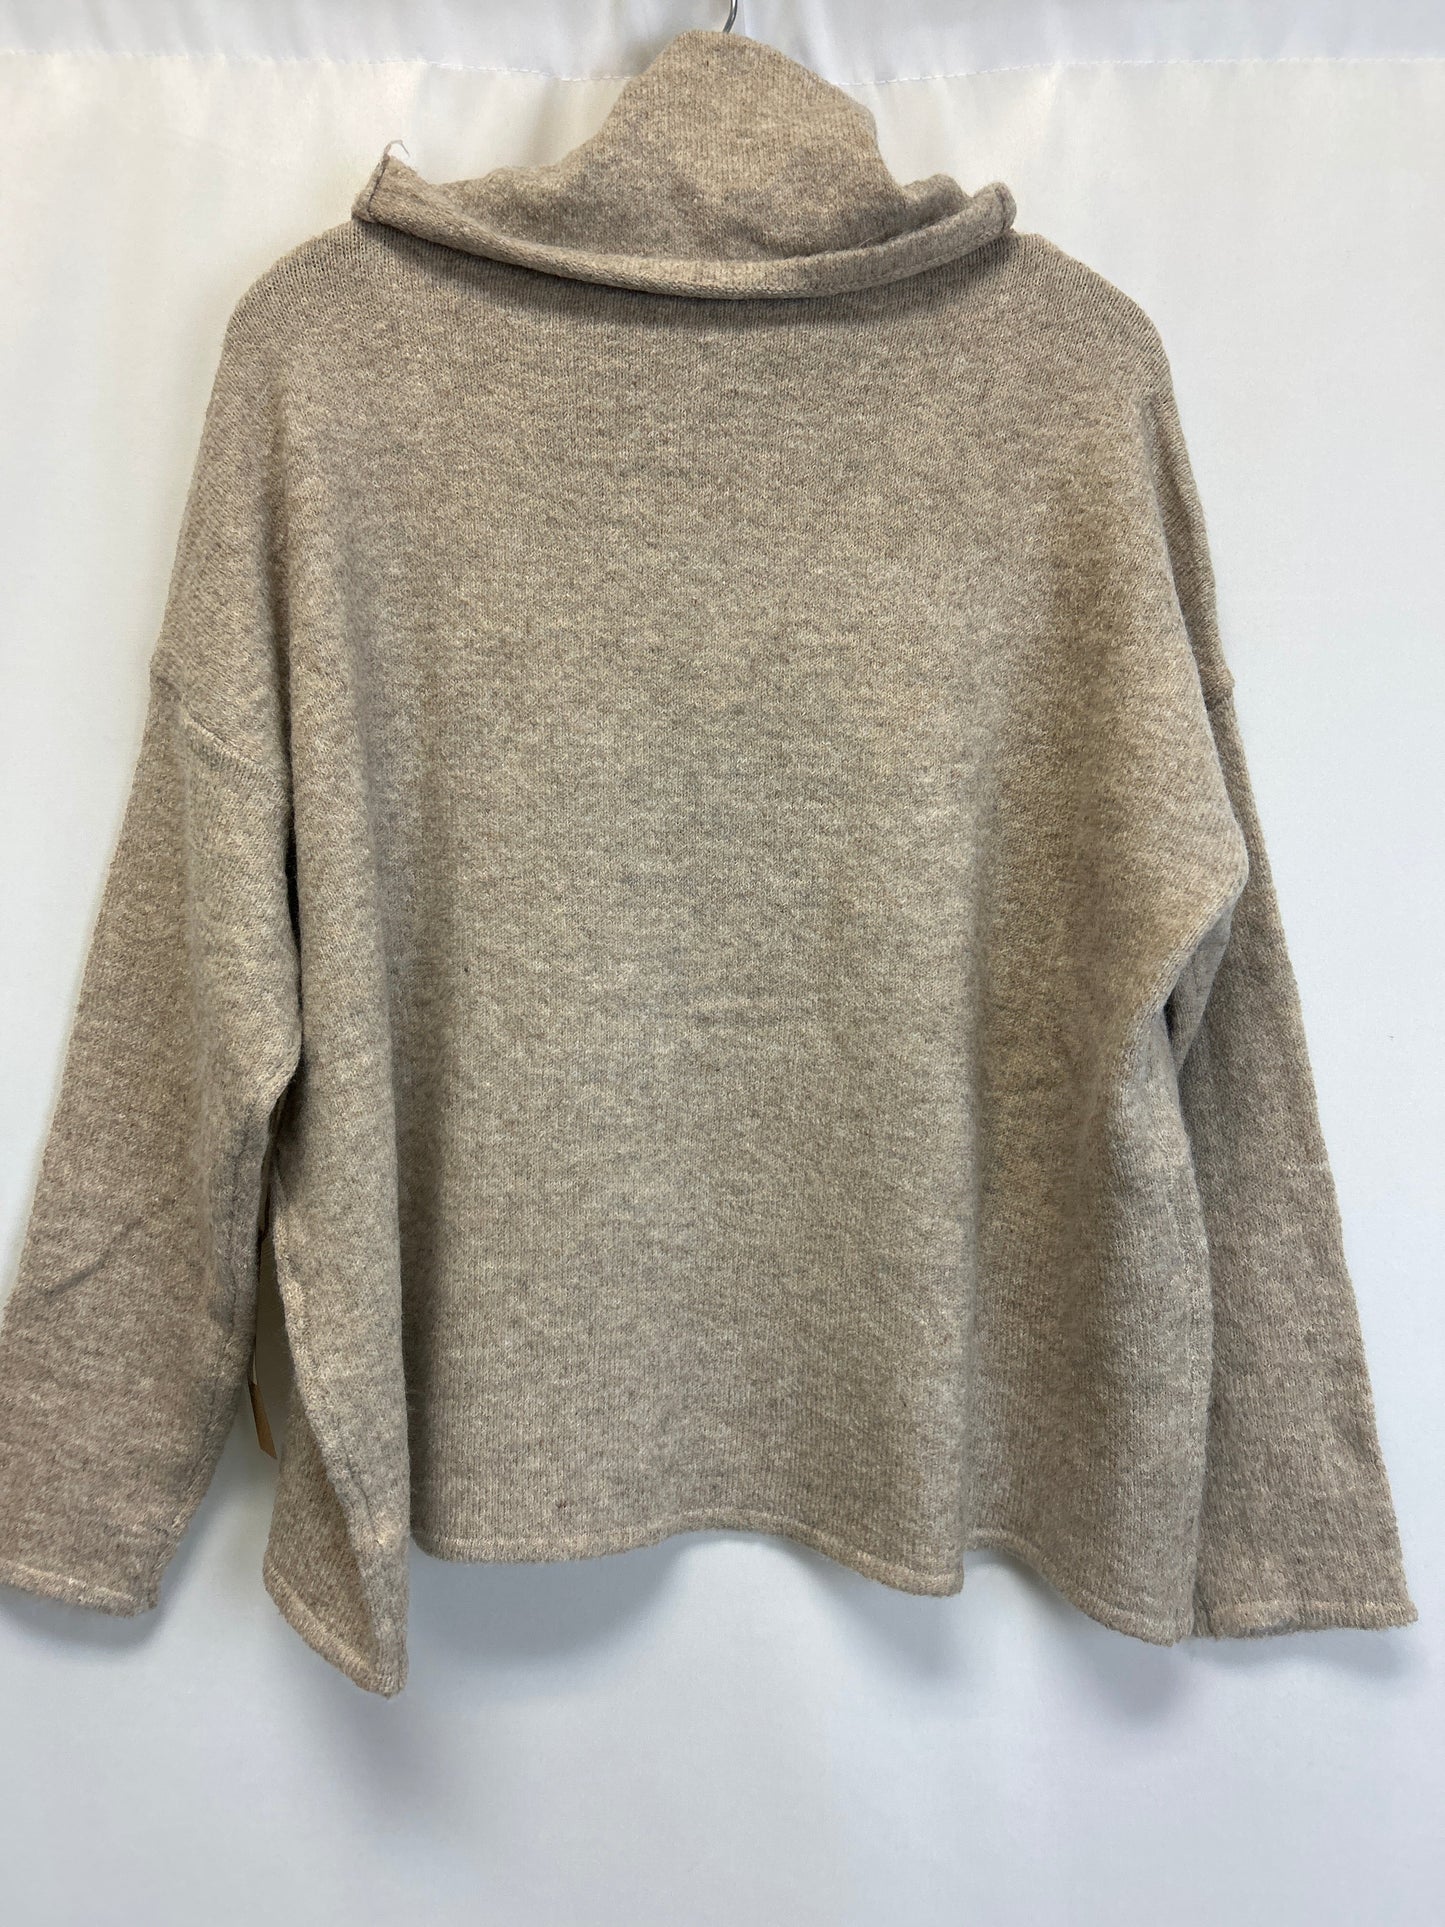 Sweater By Dreamers  Size: M